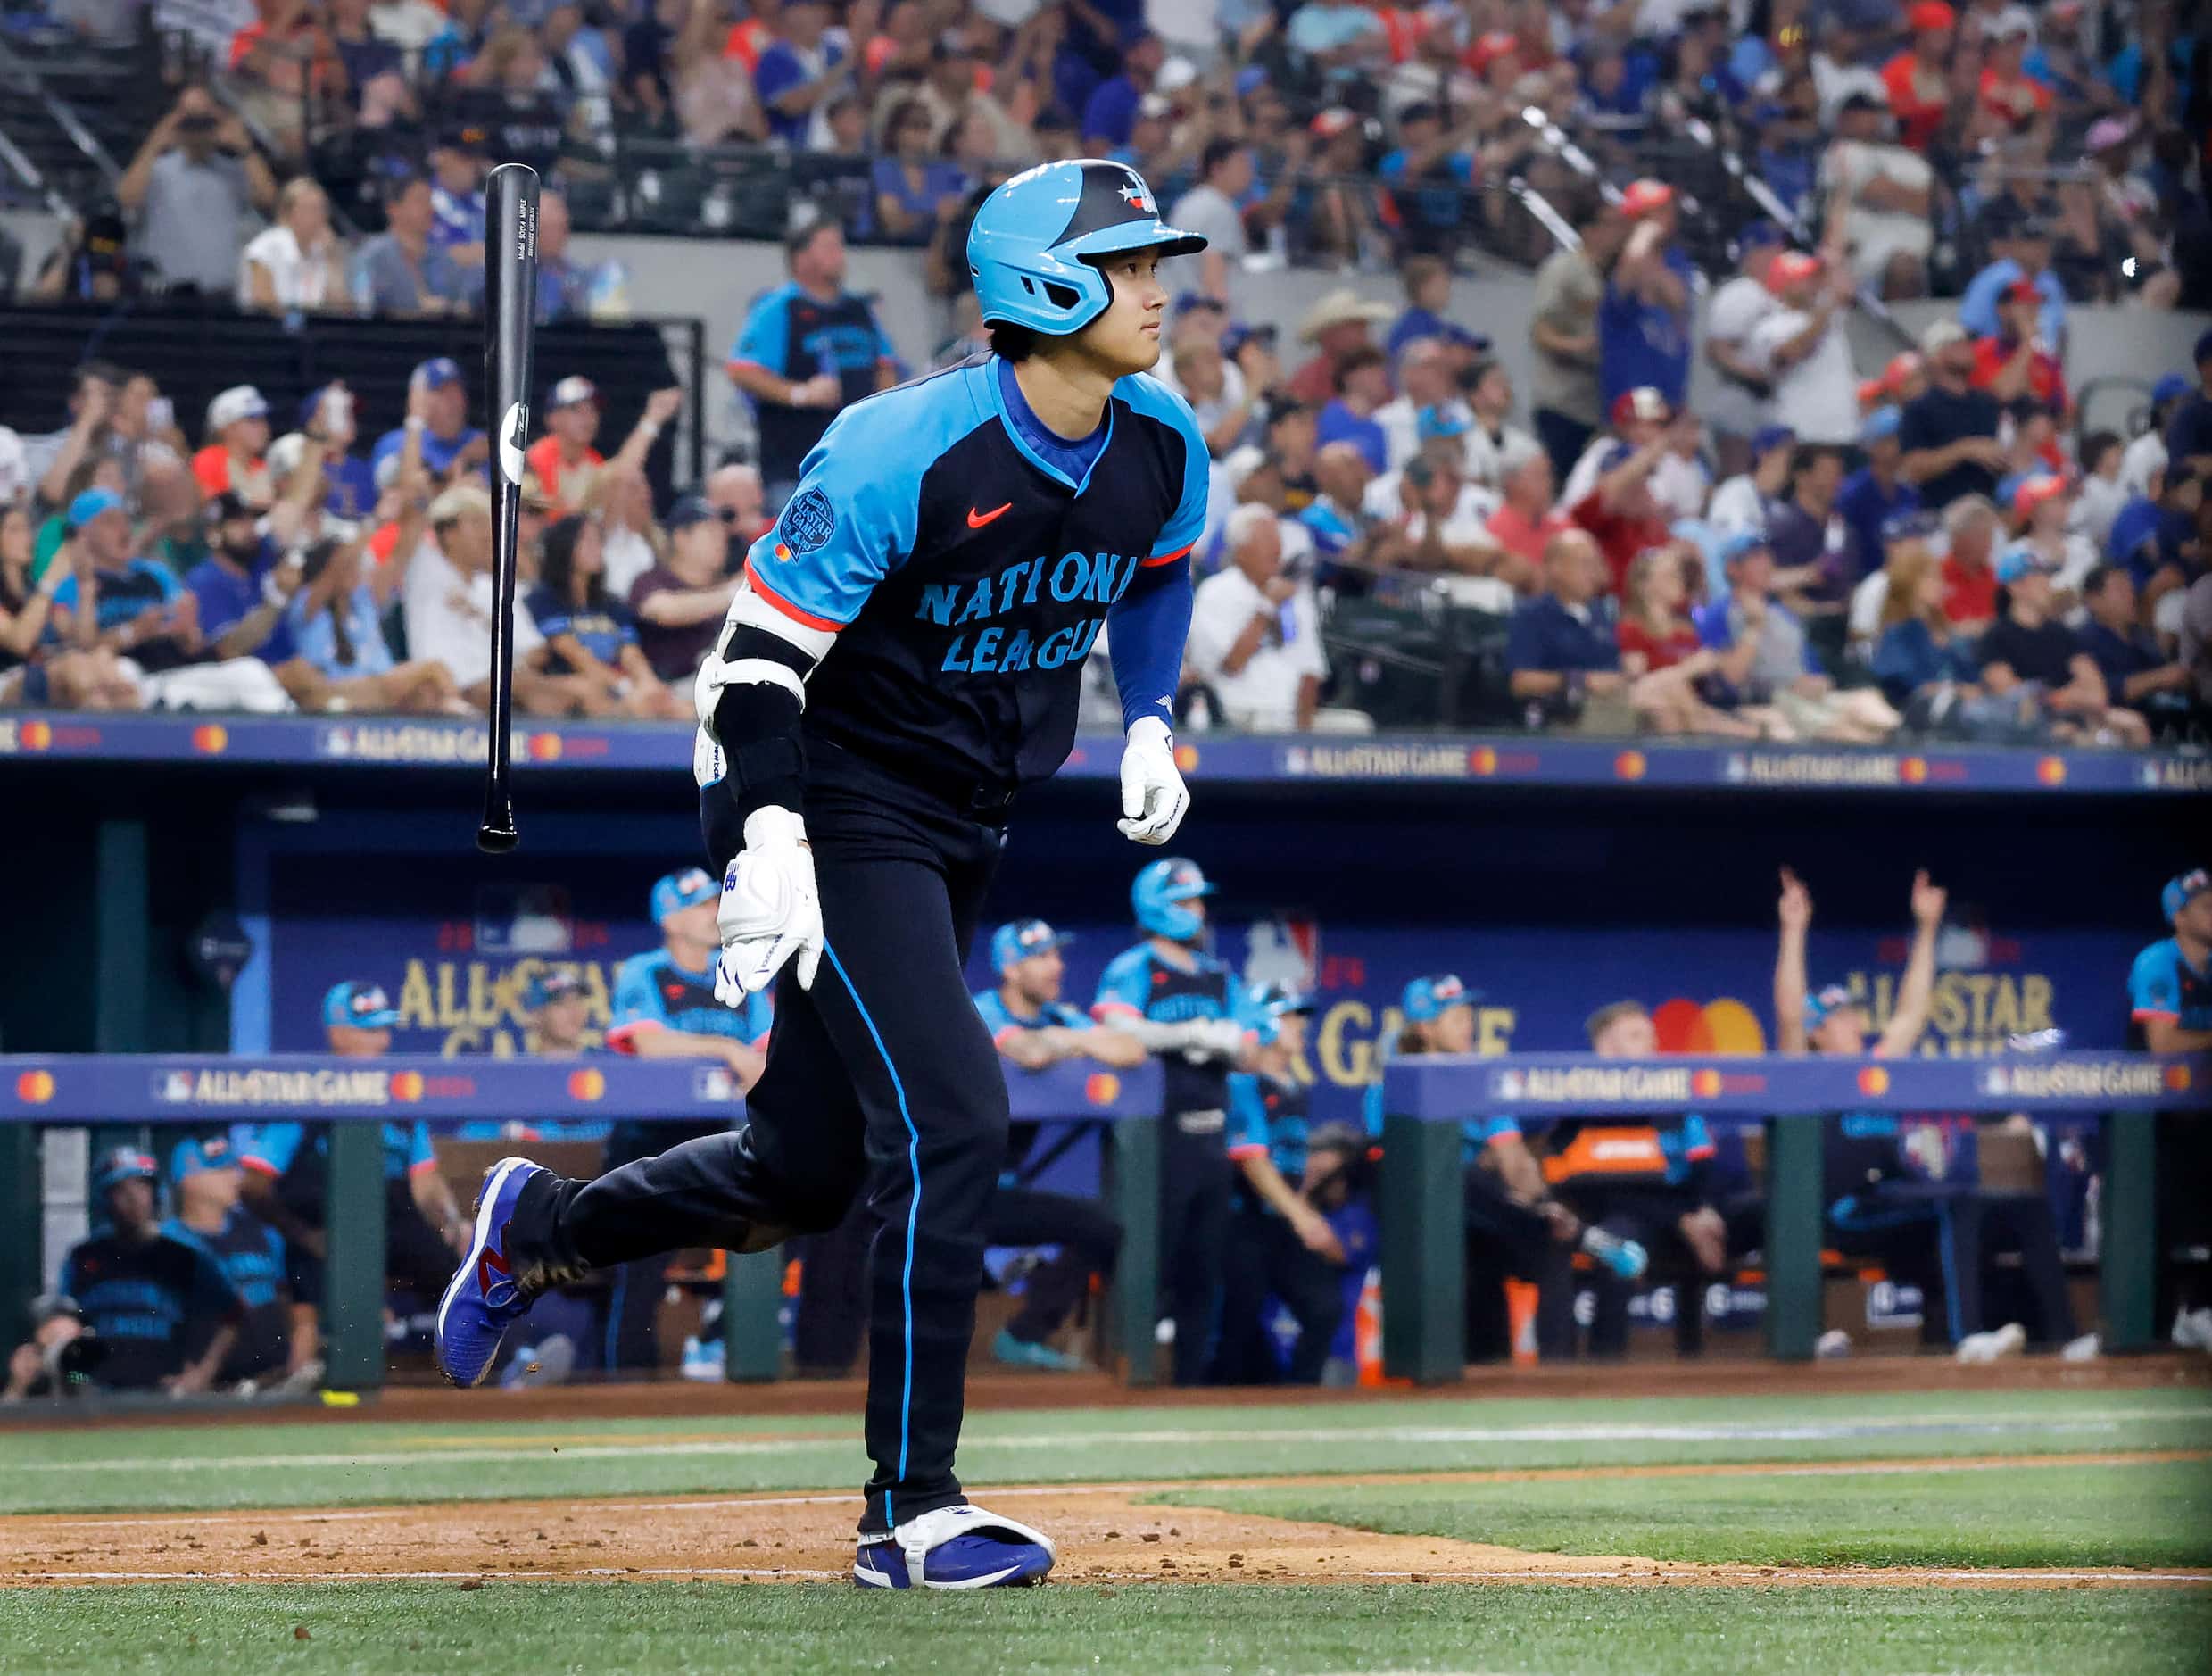 National League's Shohei Ohtani, of the Los Angeles Dodgers, flips his bat after hitting a...